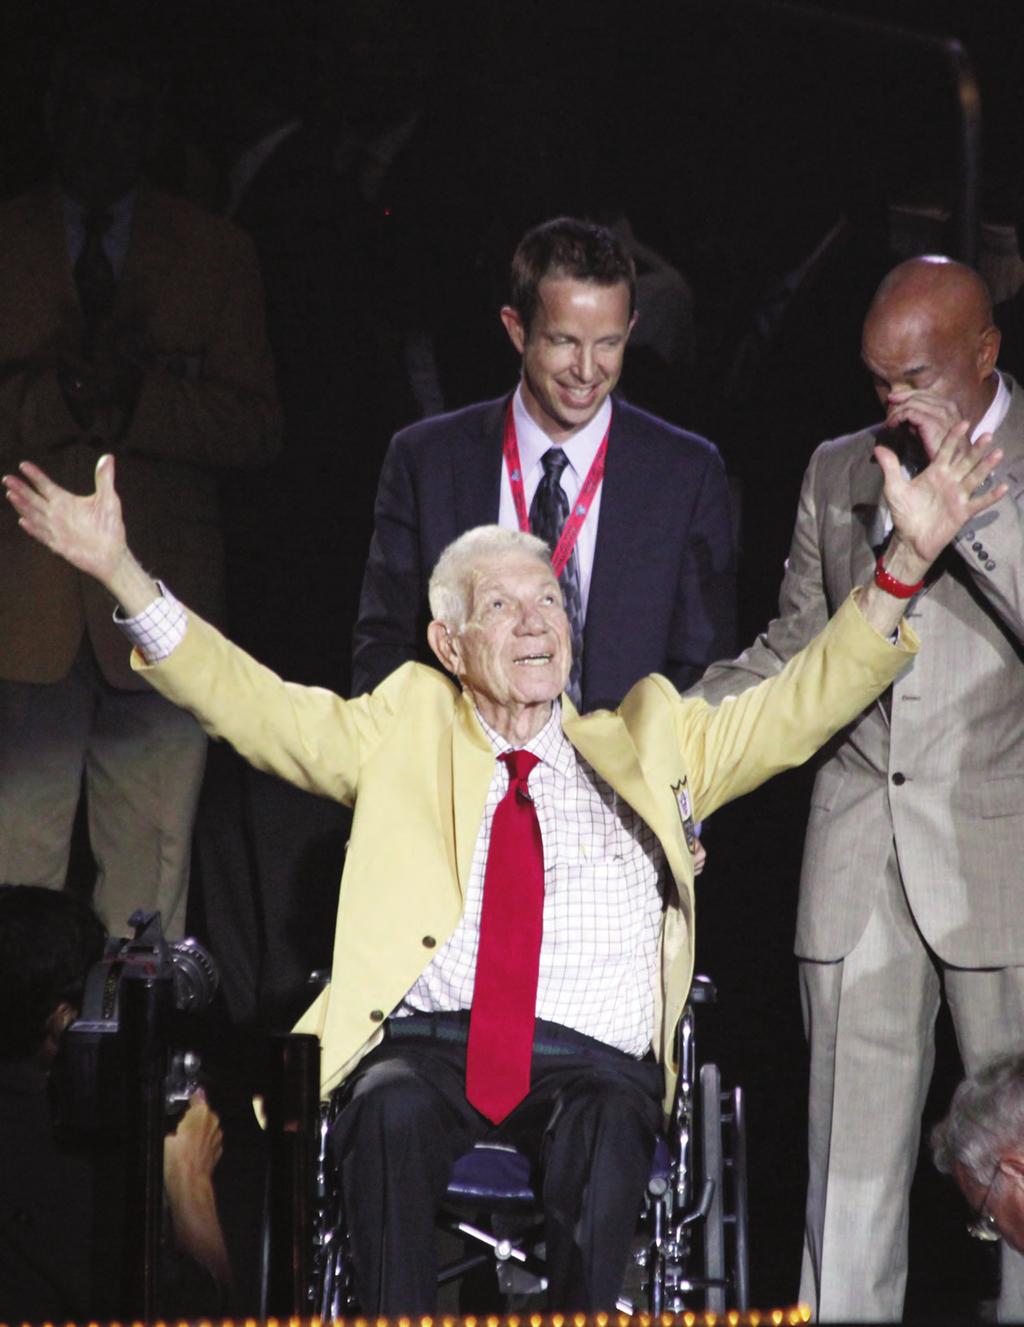 Each member of the Pro Football Hall of Fame receives his Hall of Fame gold jacket during the